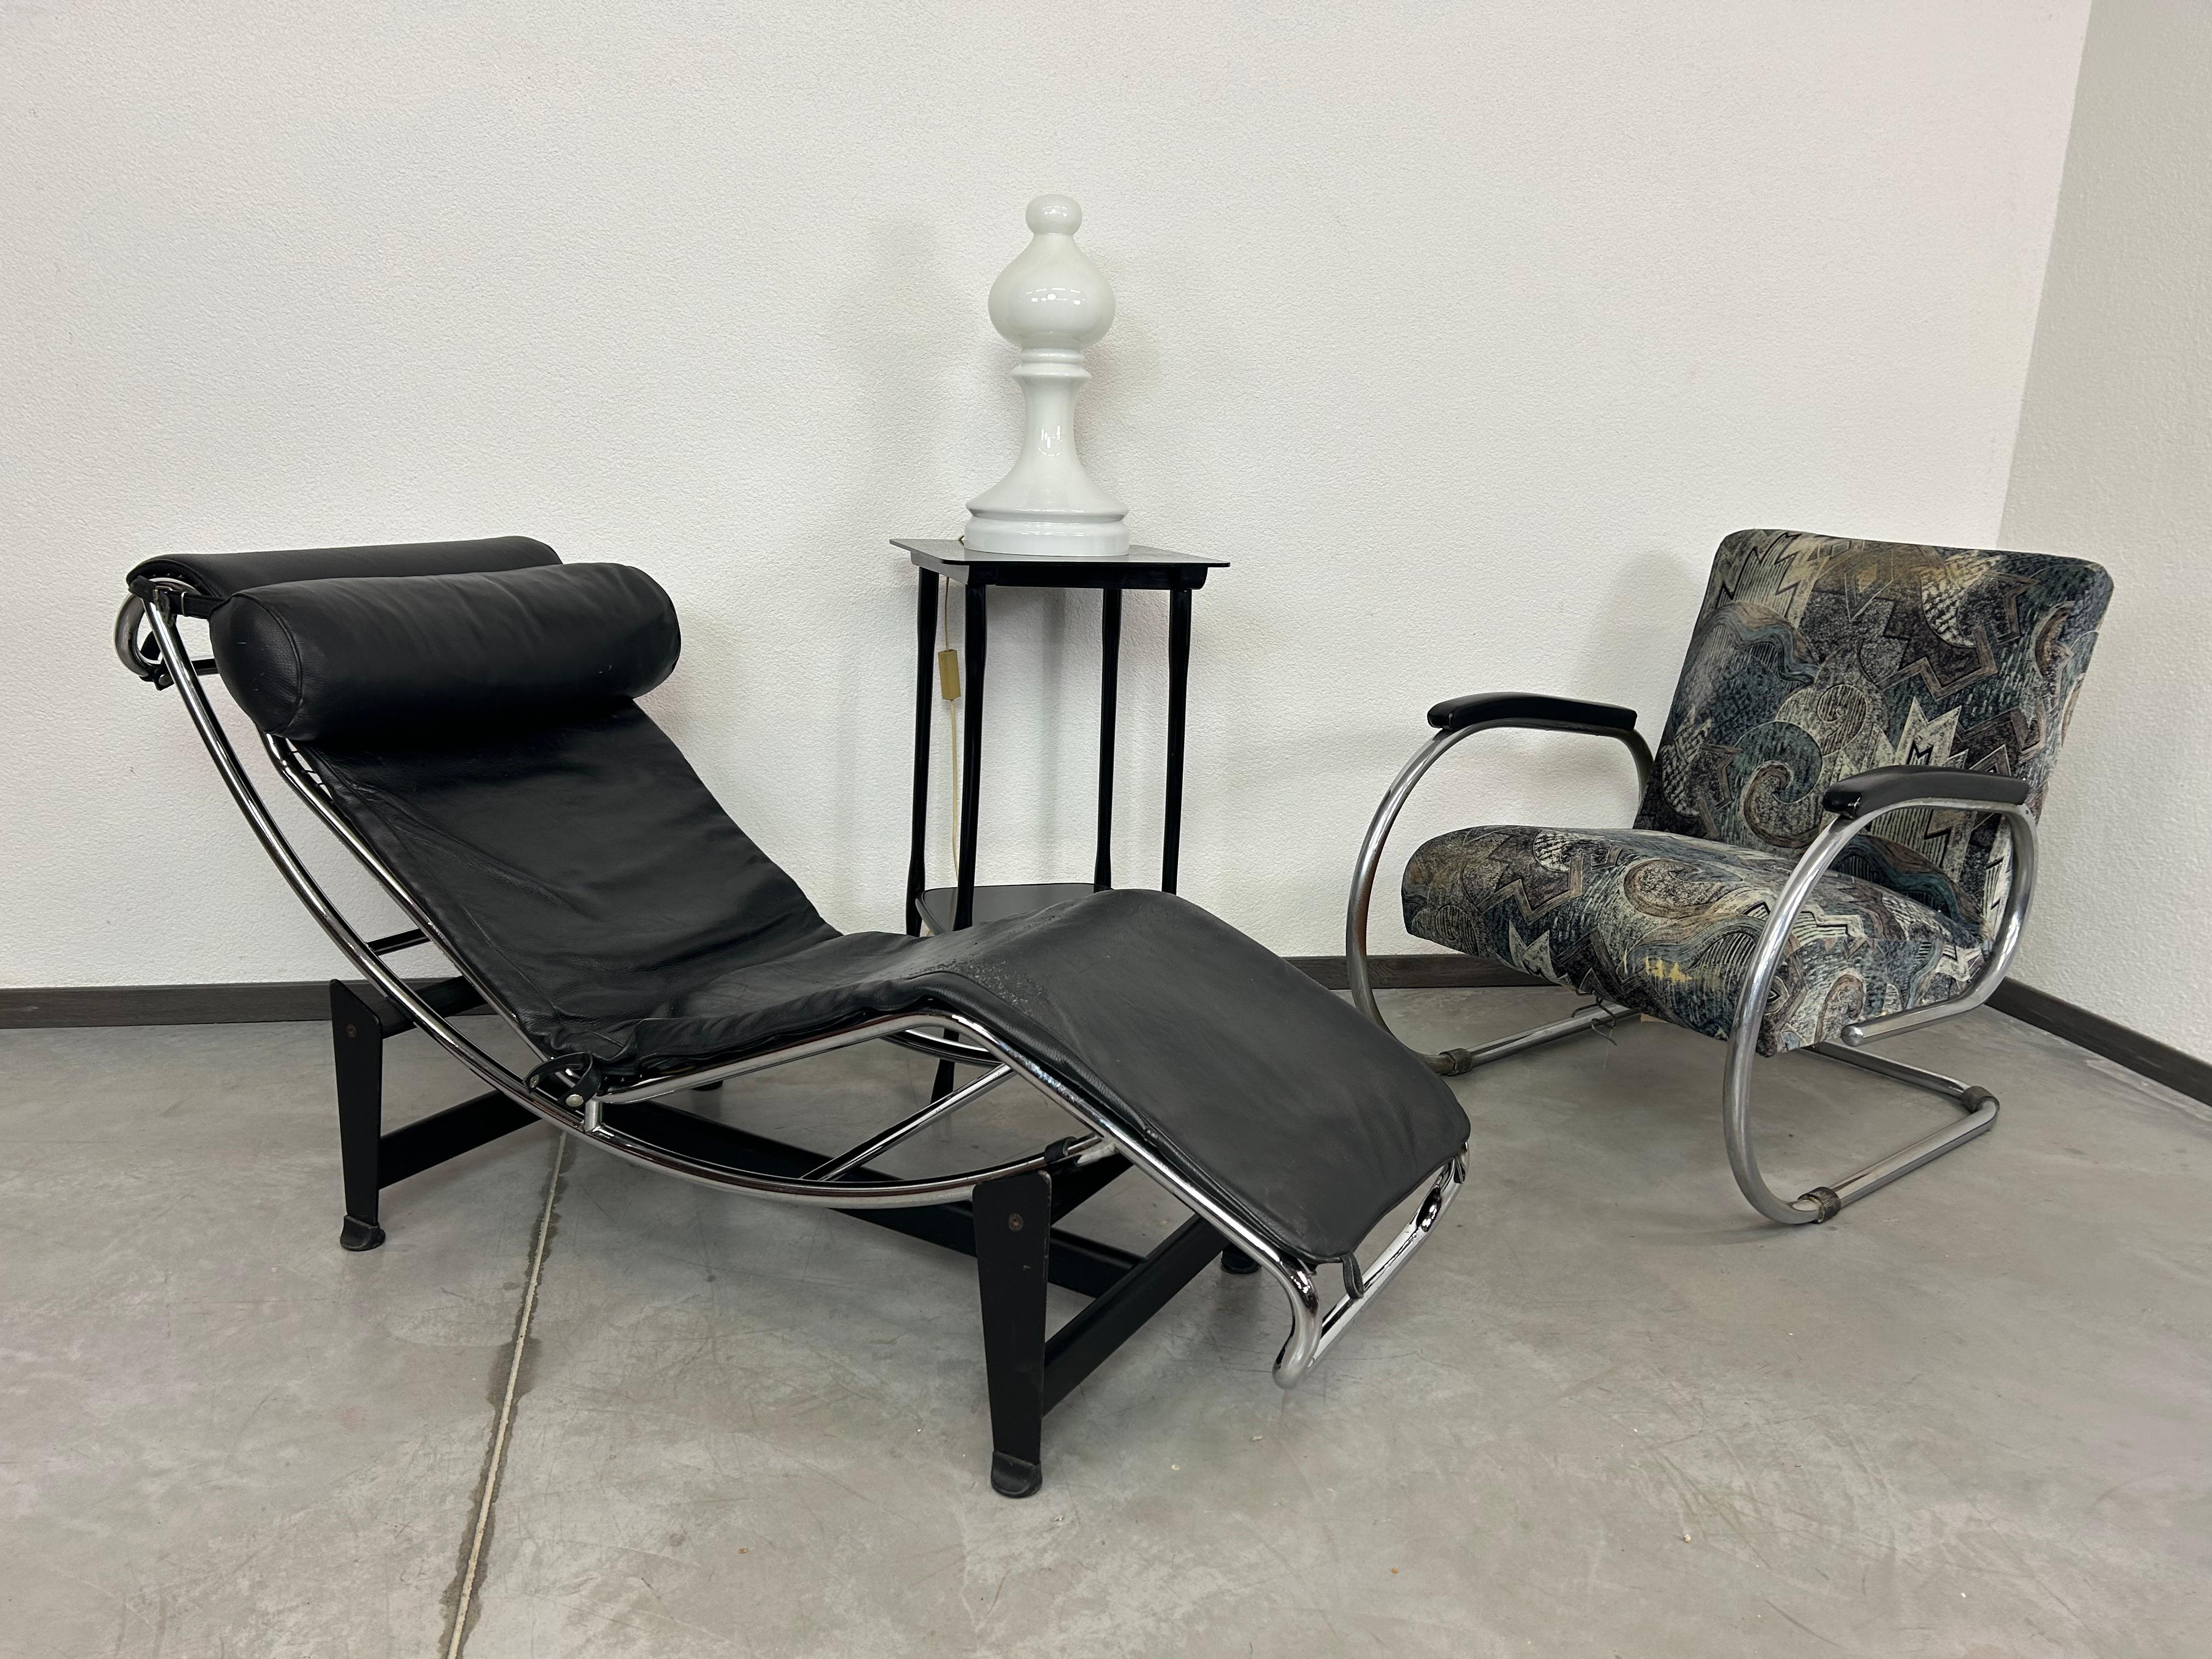 Ladies lounge chair LC4 by Le Corbusier for Casina in original vintage condition with signs of use.